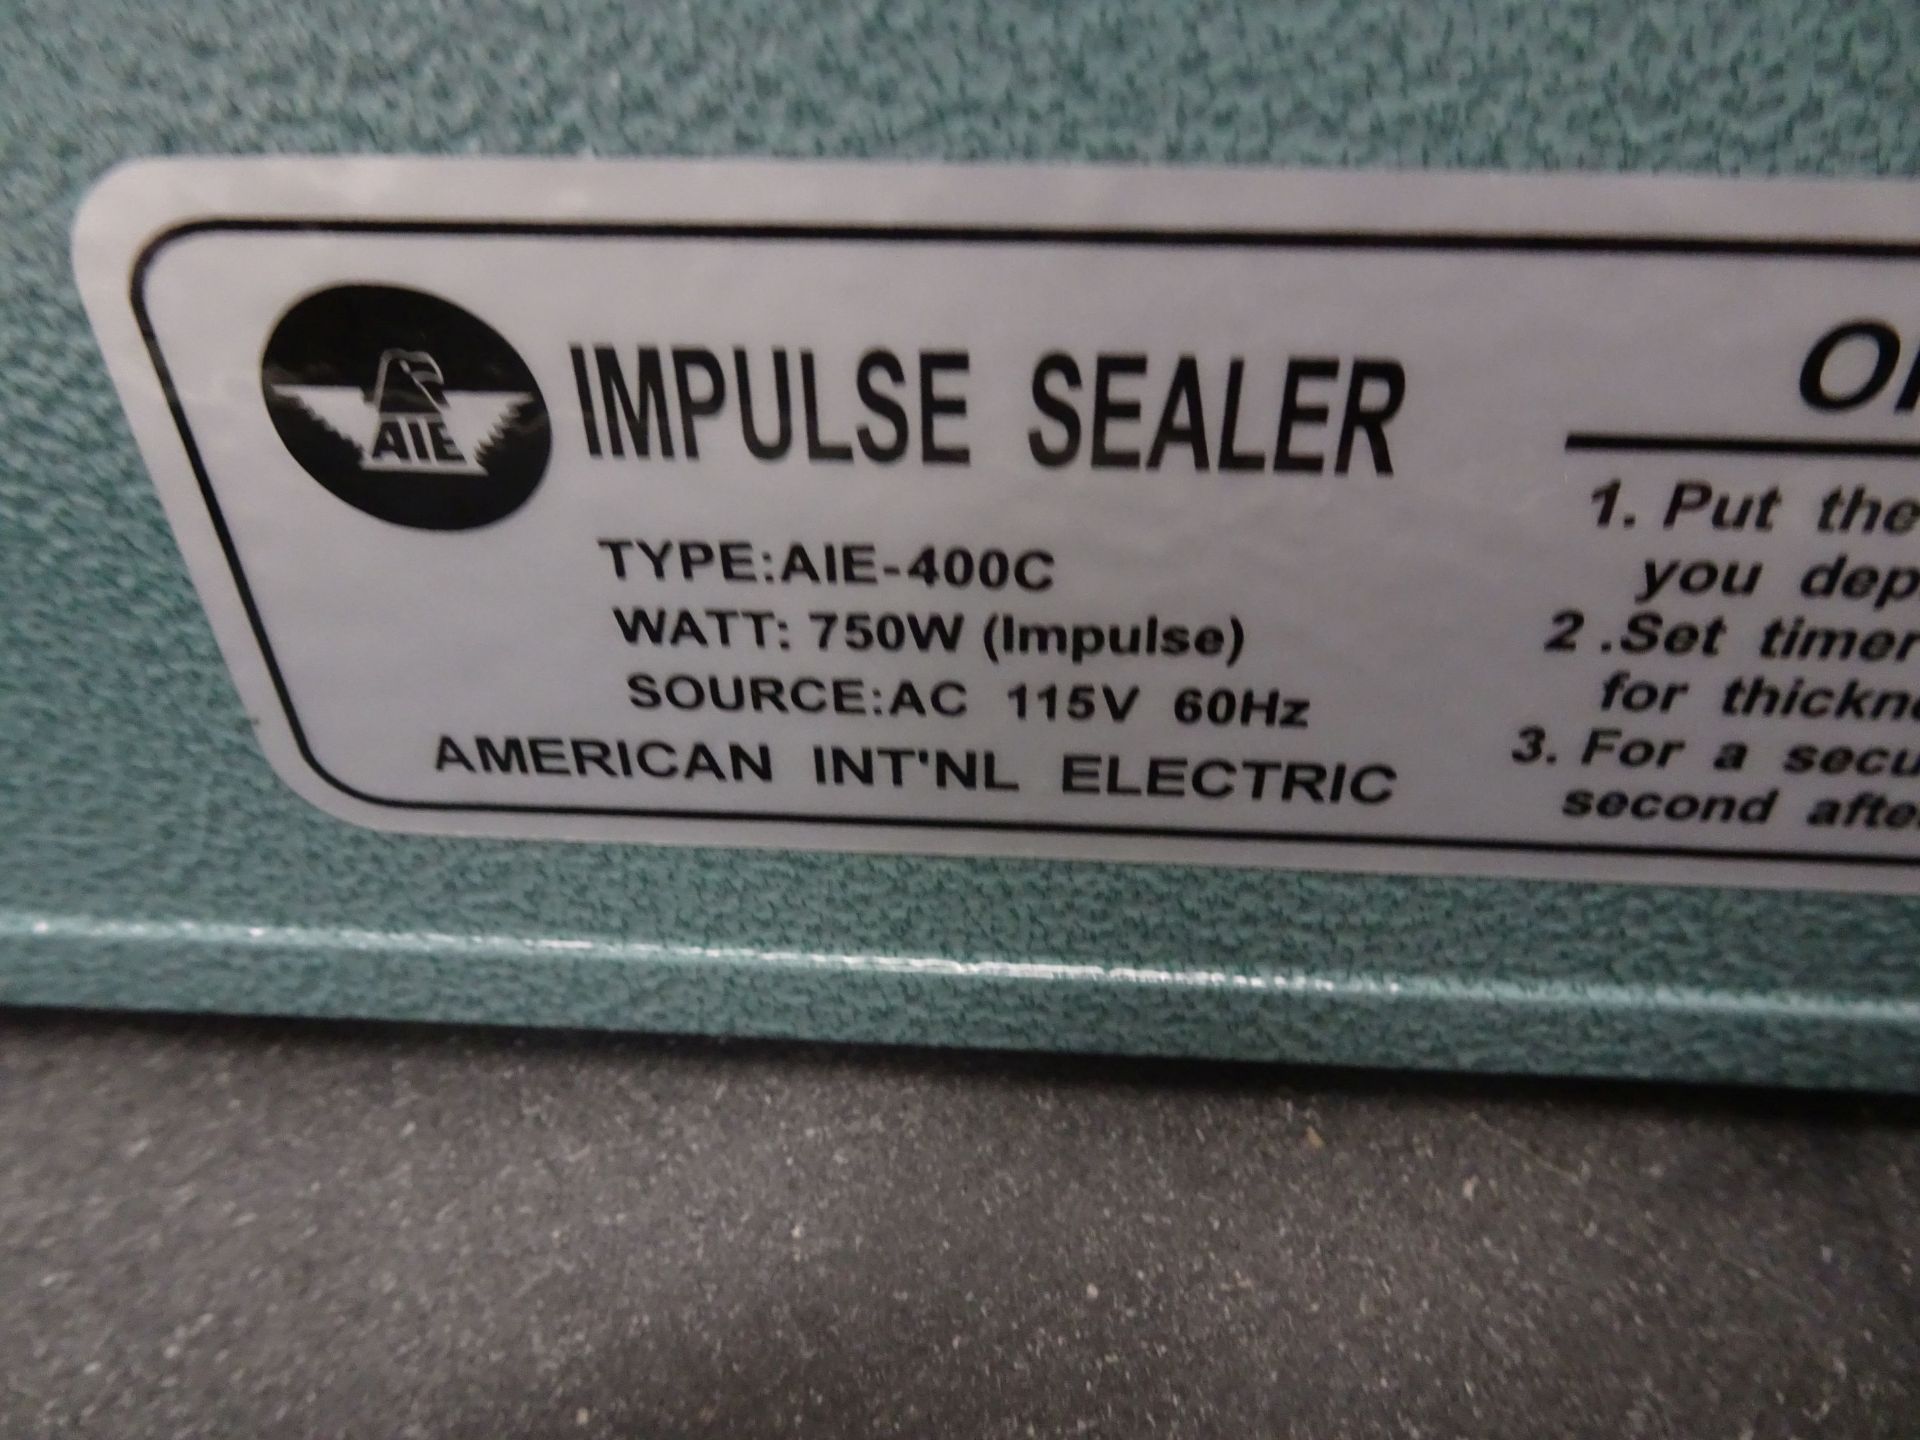 American Intl Electric Model AIE-400C 16" (400mm) 750Watt Impulse Sealer with Associated Bags and - Image 2 of 6